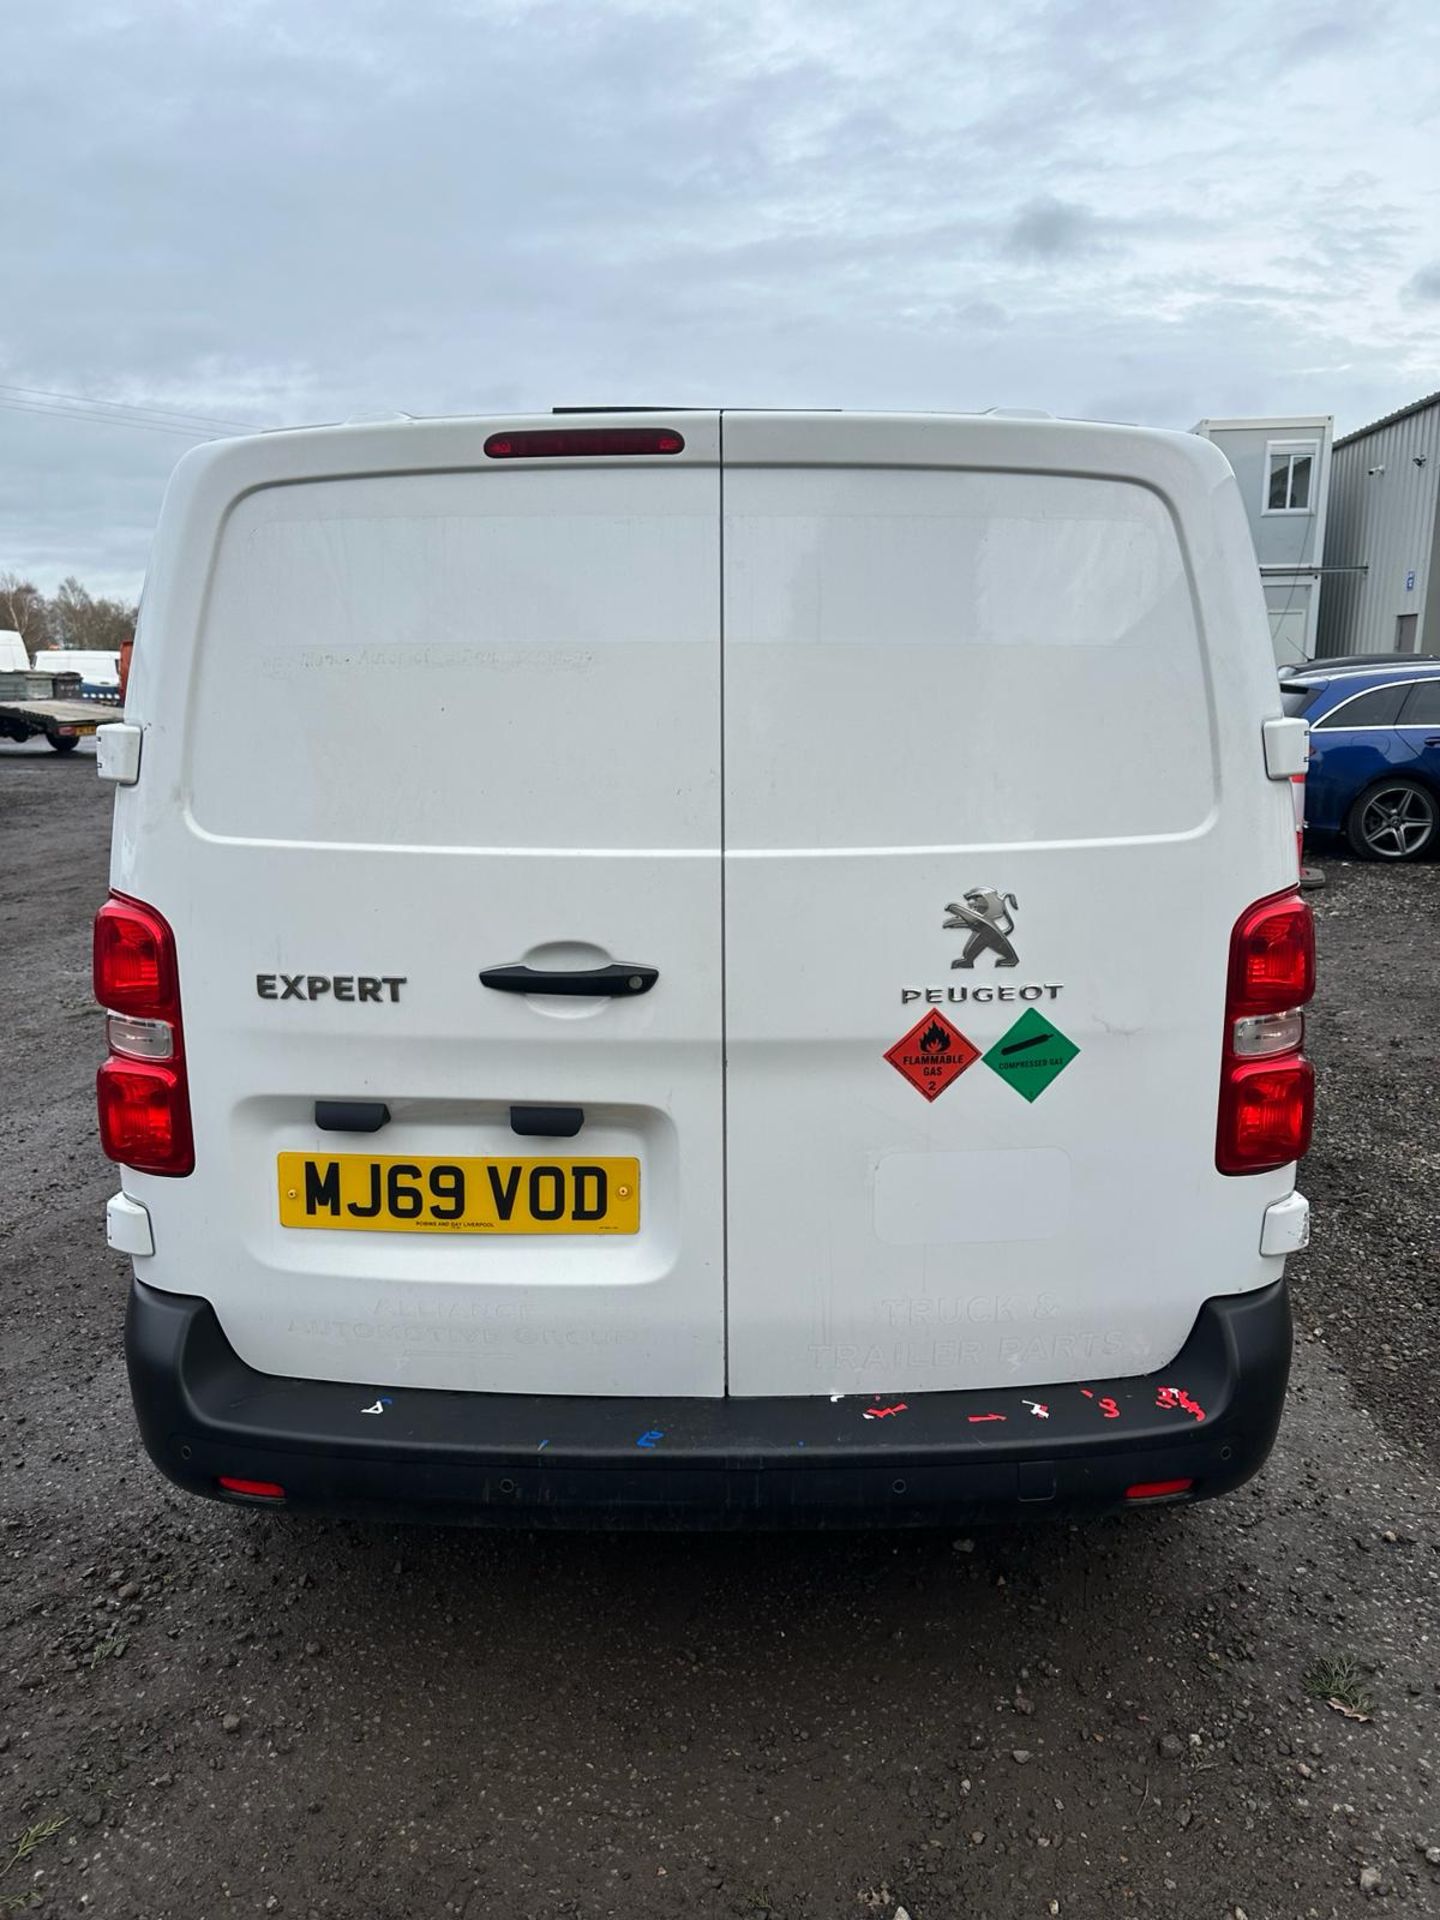 2019 69 PEUGEOT EXPERT PANEL VAN - 140K MILES - AIR CON - PLY LINED - Image 8 of 10